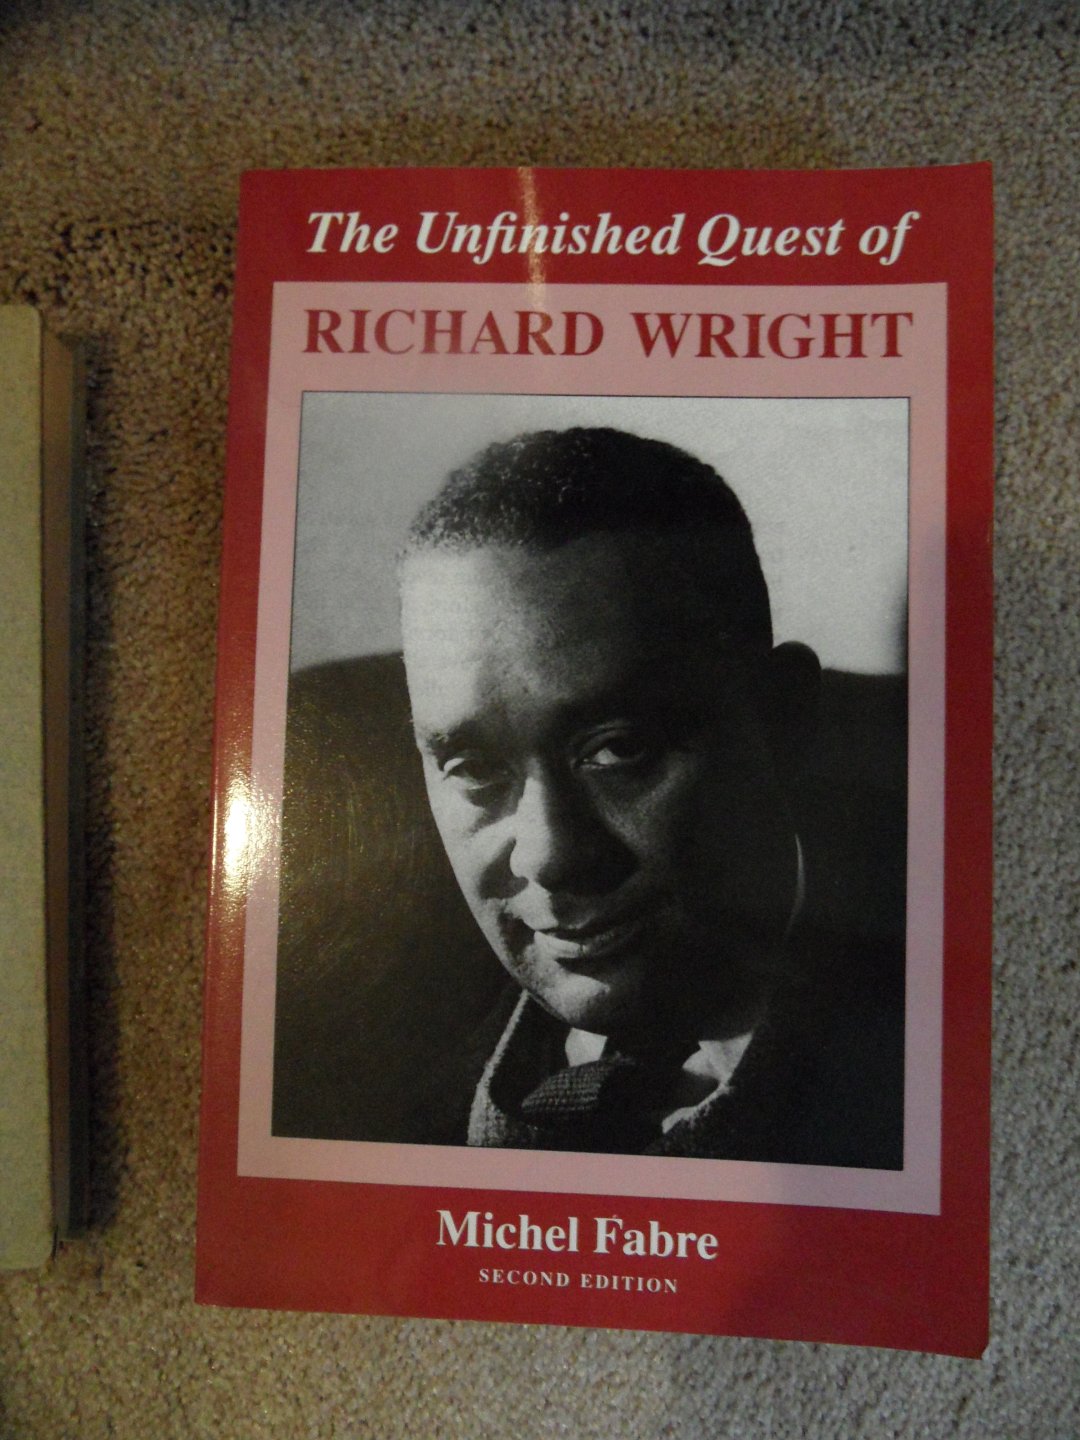 Fabre, Michel - The unfinished quest of Richard Wright